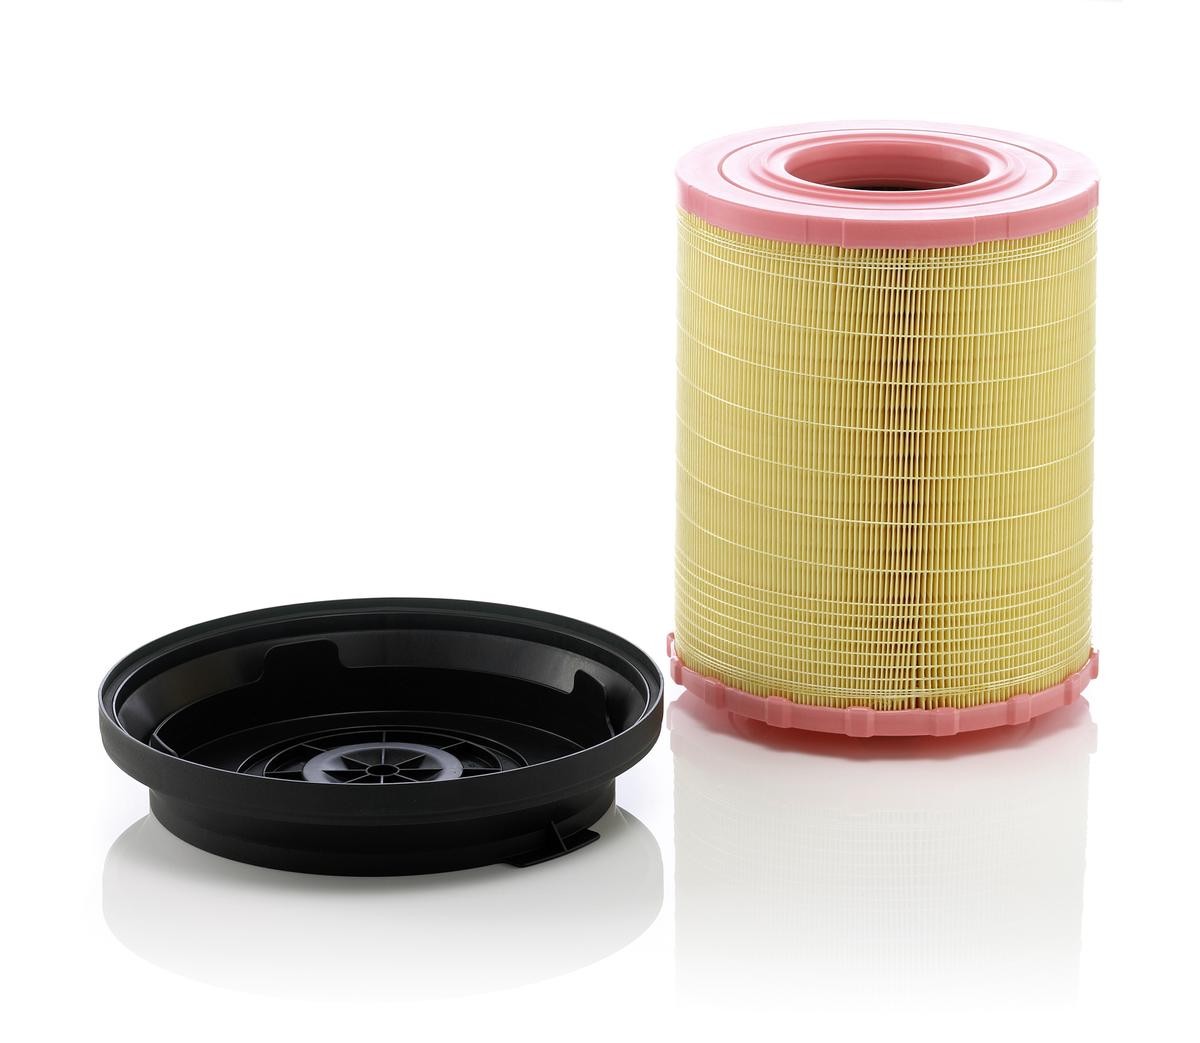 MANN-FILTER 347mm, 274mm, Filter Insert, with reusable housing cover Height: 347mm Engine air filter C 29 010 KIT buy